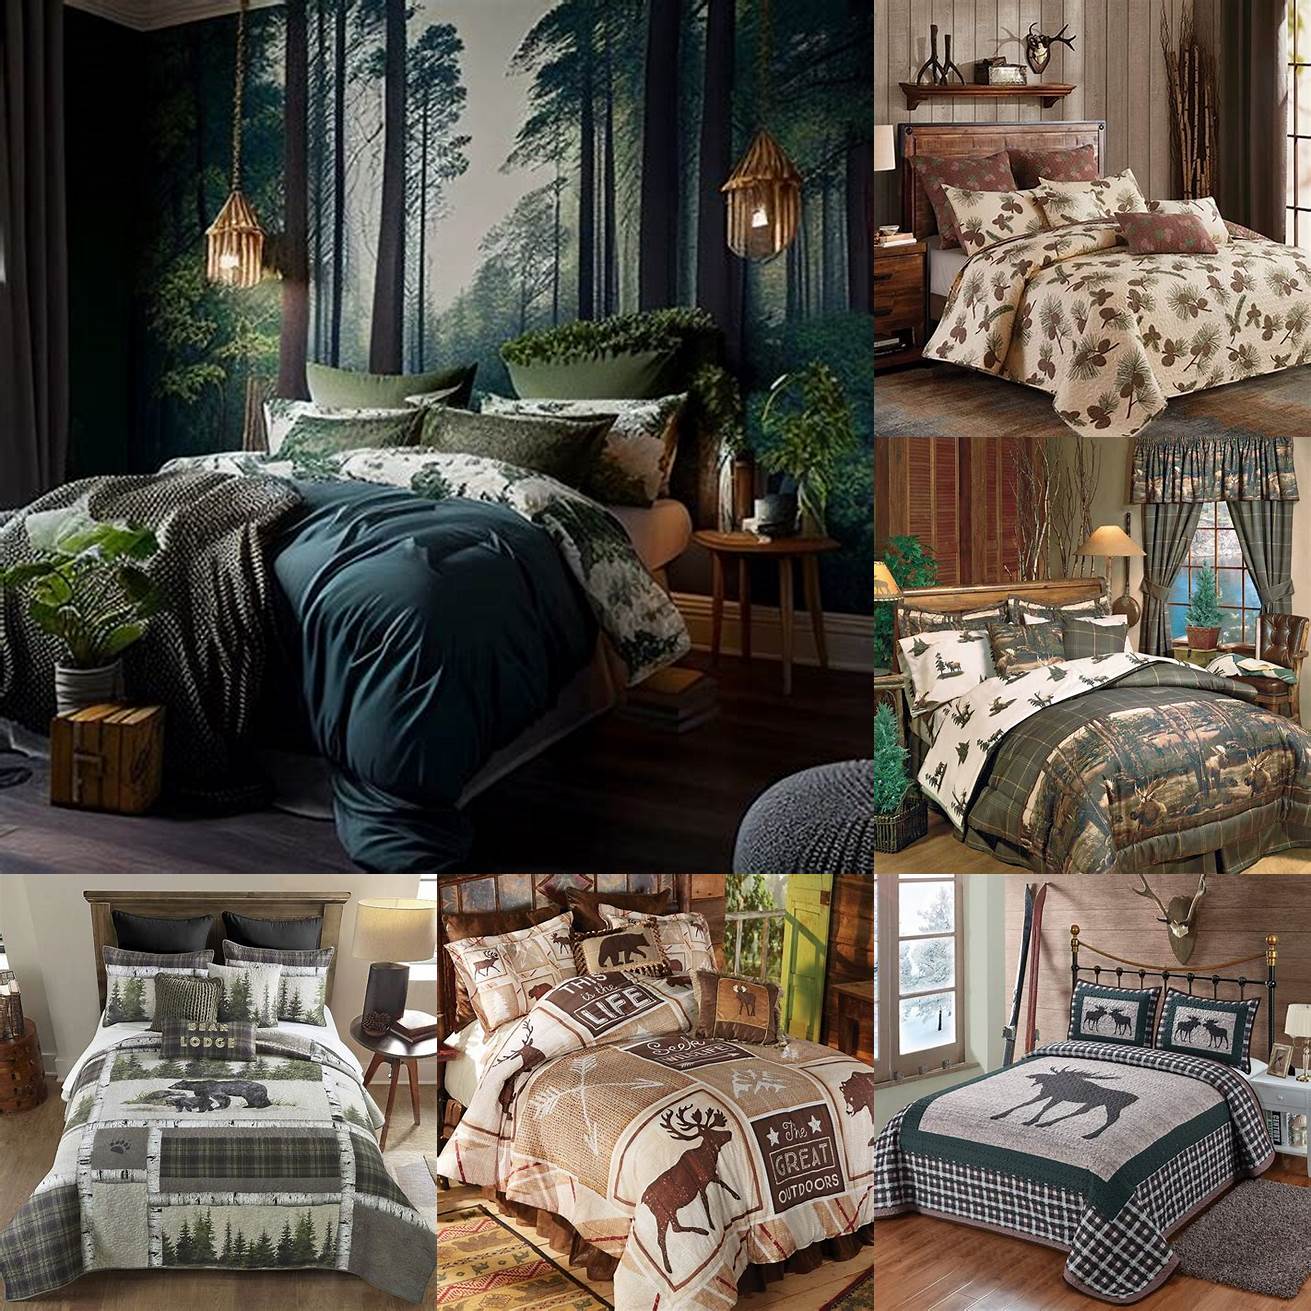 Tree-themed cabin bedding brings the beauty of nature into your bedroom